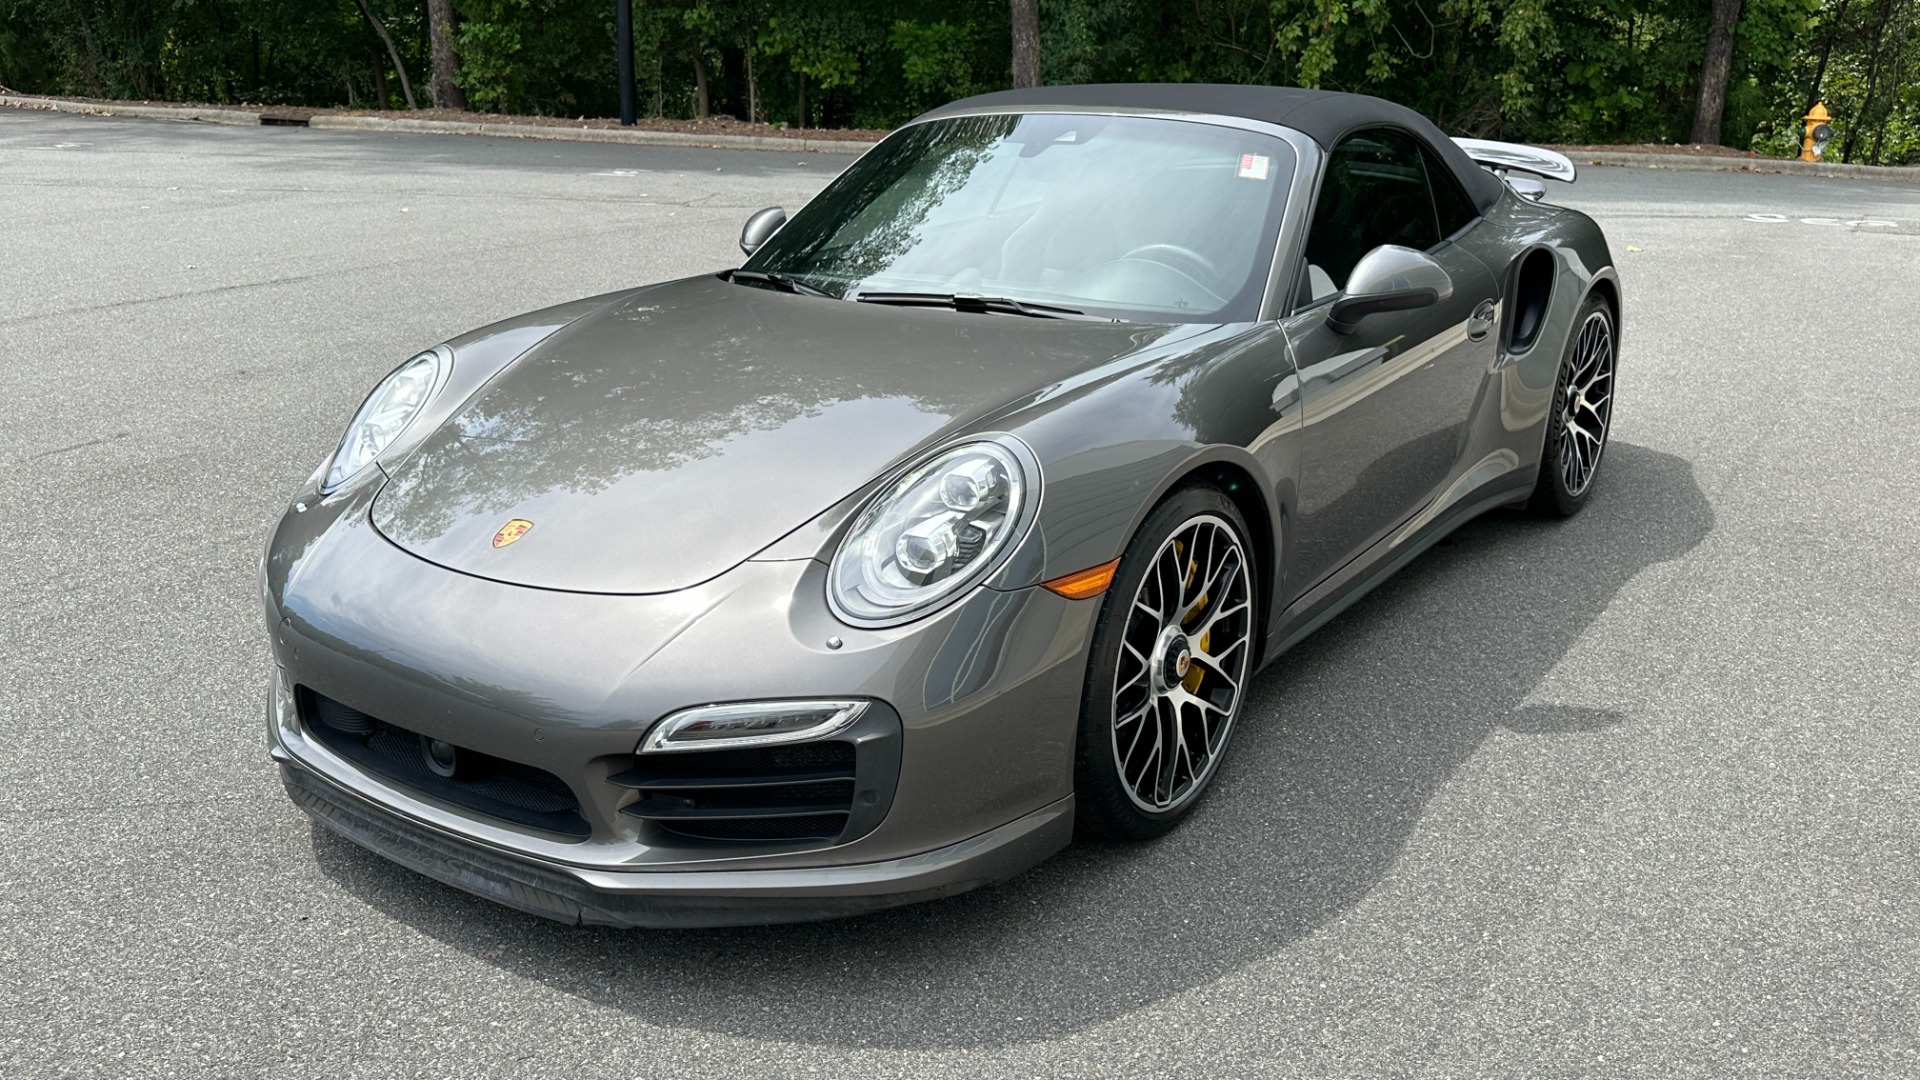 Used 2015 Porsche 911 TURBO S / BYDESIGN STAGE 4.2 POWER PACKAGE / $30K IN UPGRADES / APPLE CARPL for sale $118,999 at Formula Imports in Charlotte NC 28227 5